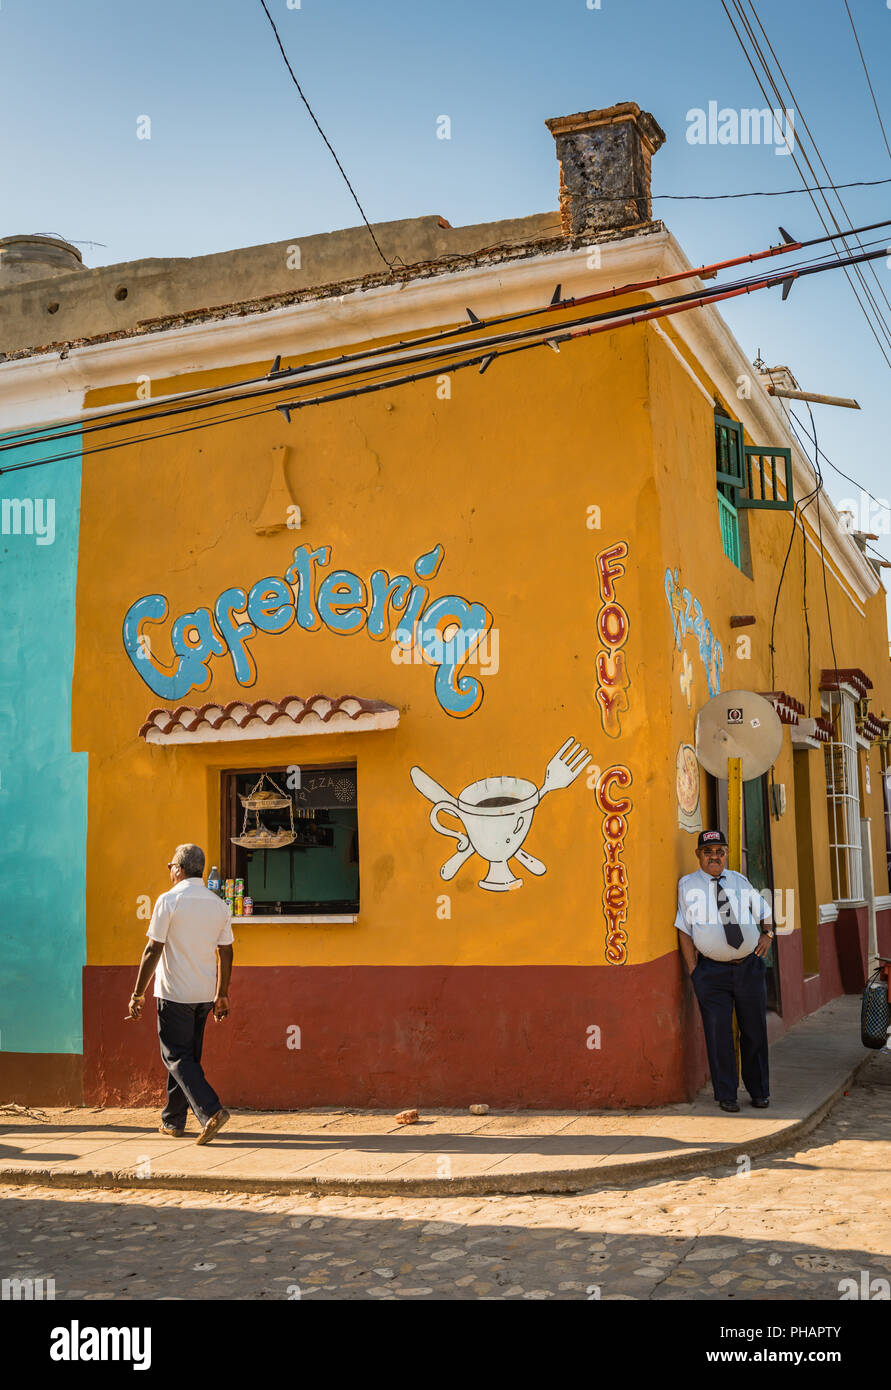 Trinidad, Cuba / March 15, 2016: Cuban man leans against colorful corner coffee shop with painted mural in UNESCO heritage city. Stock Photo